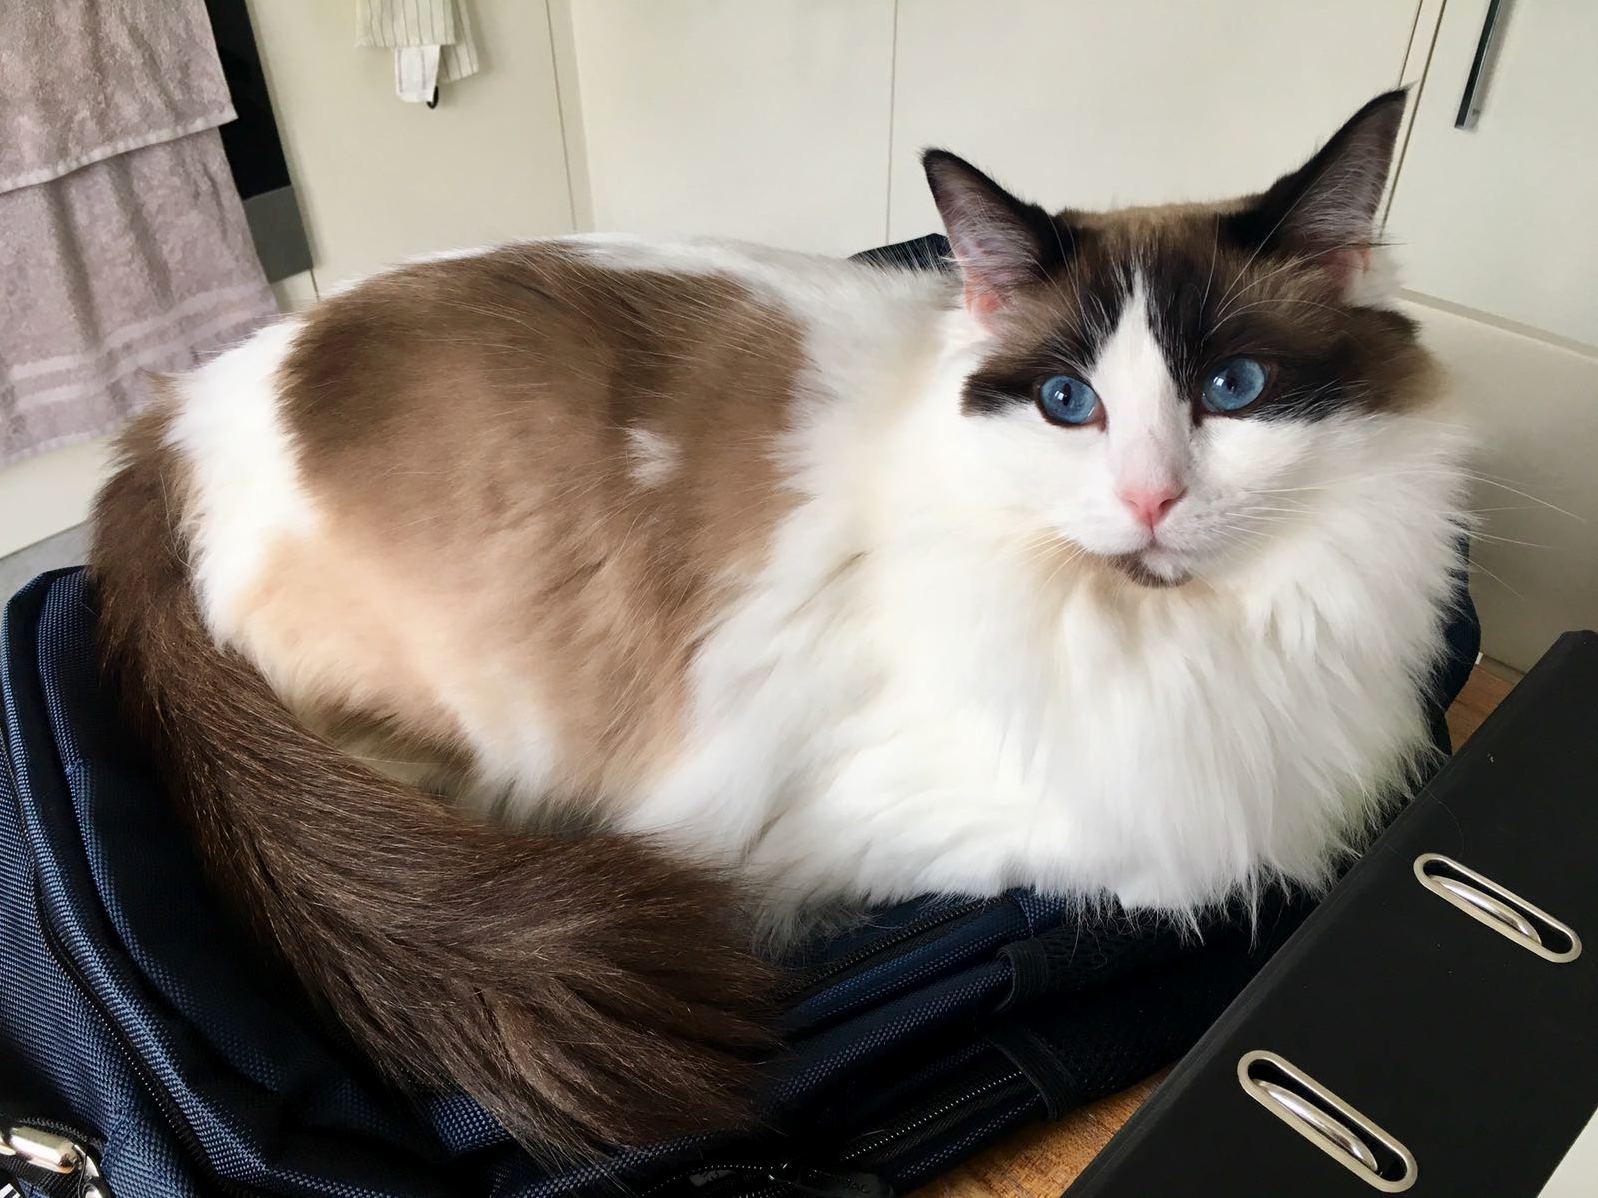 Its not like i needed my laptop or anything…